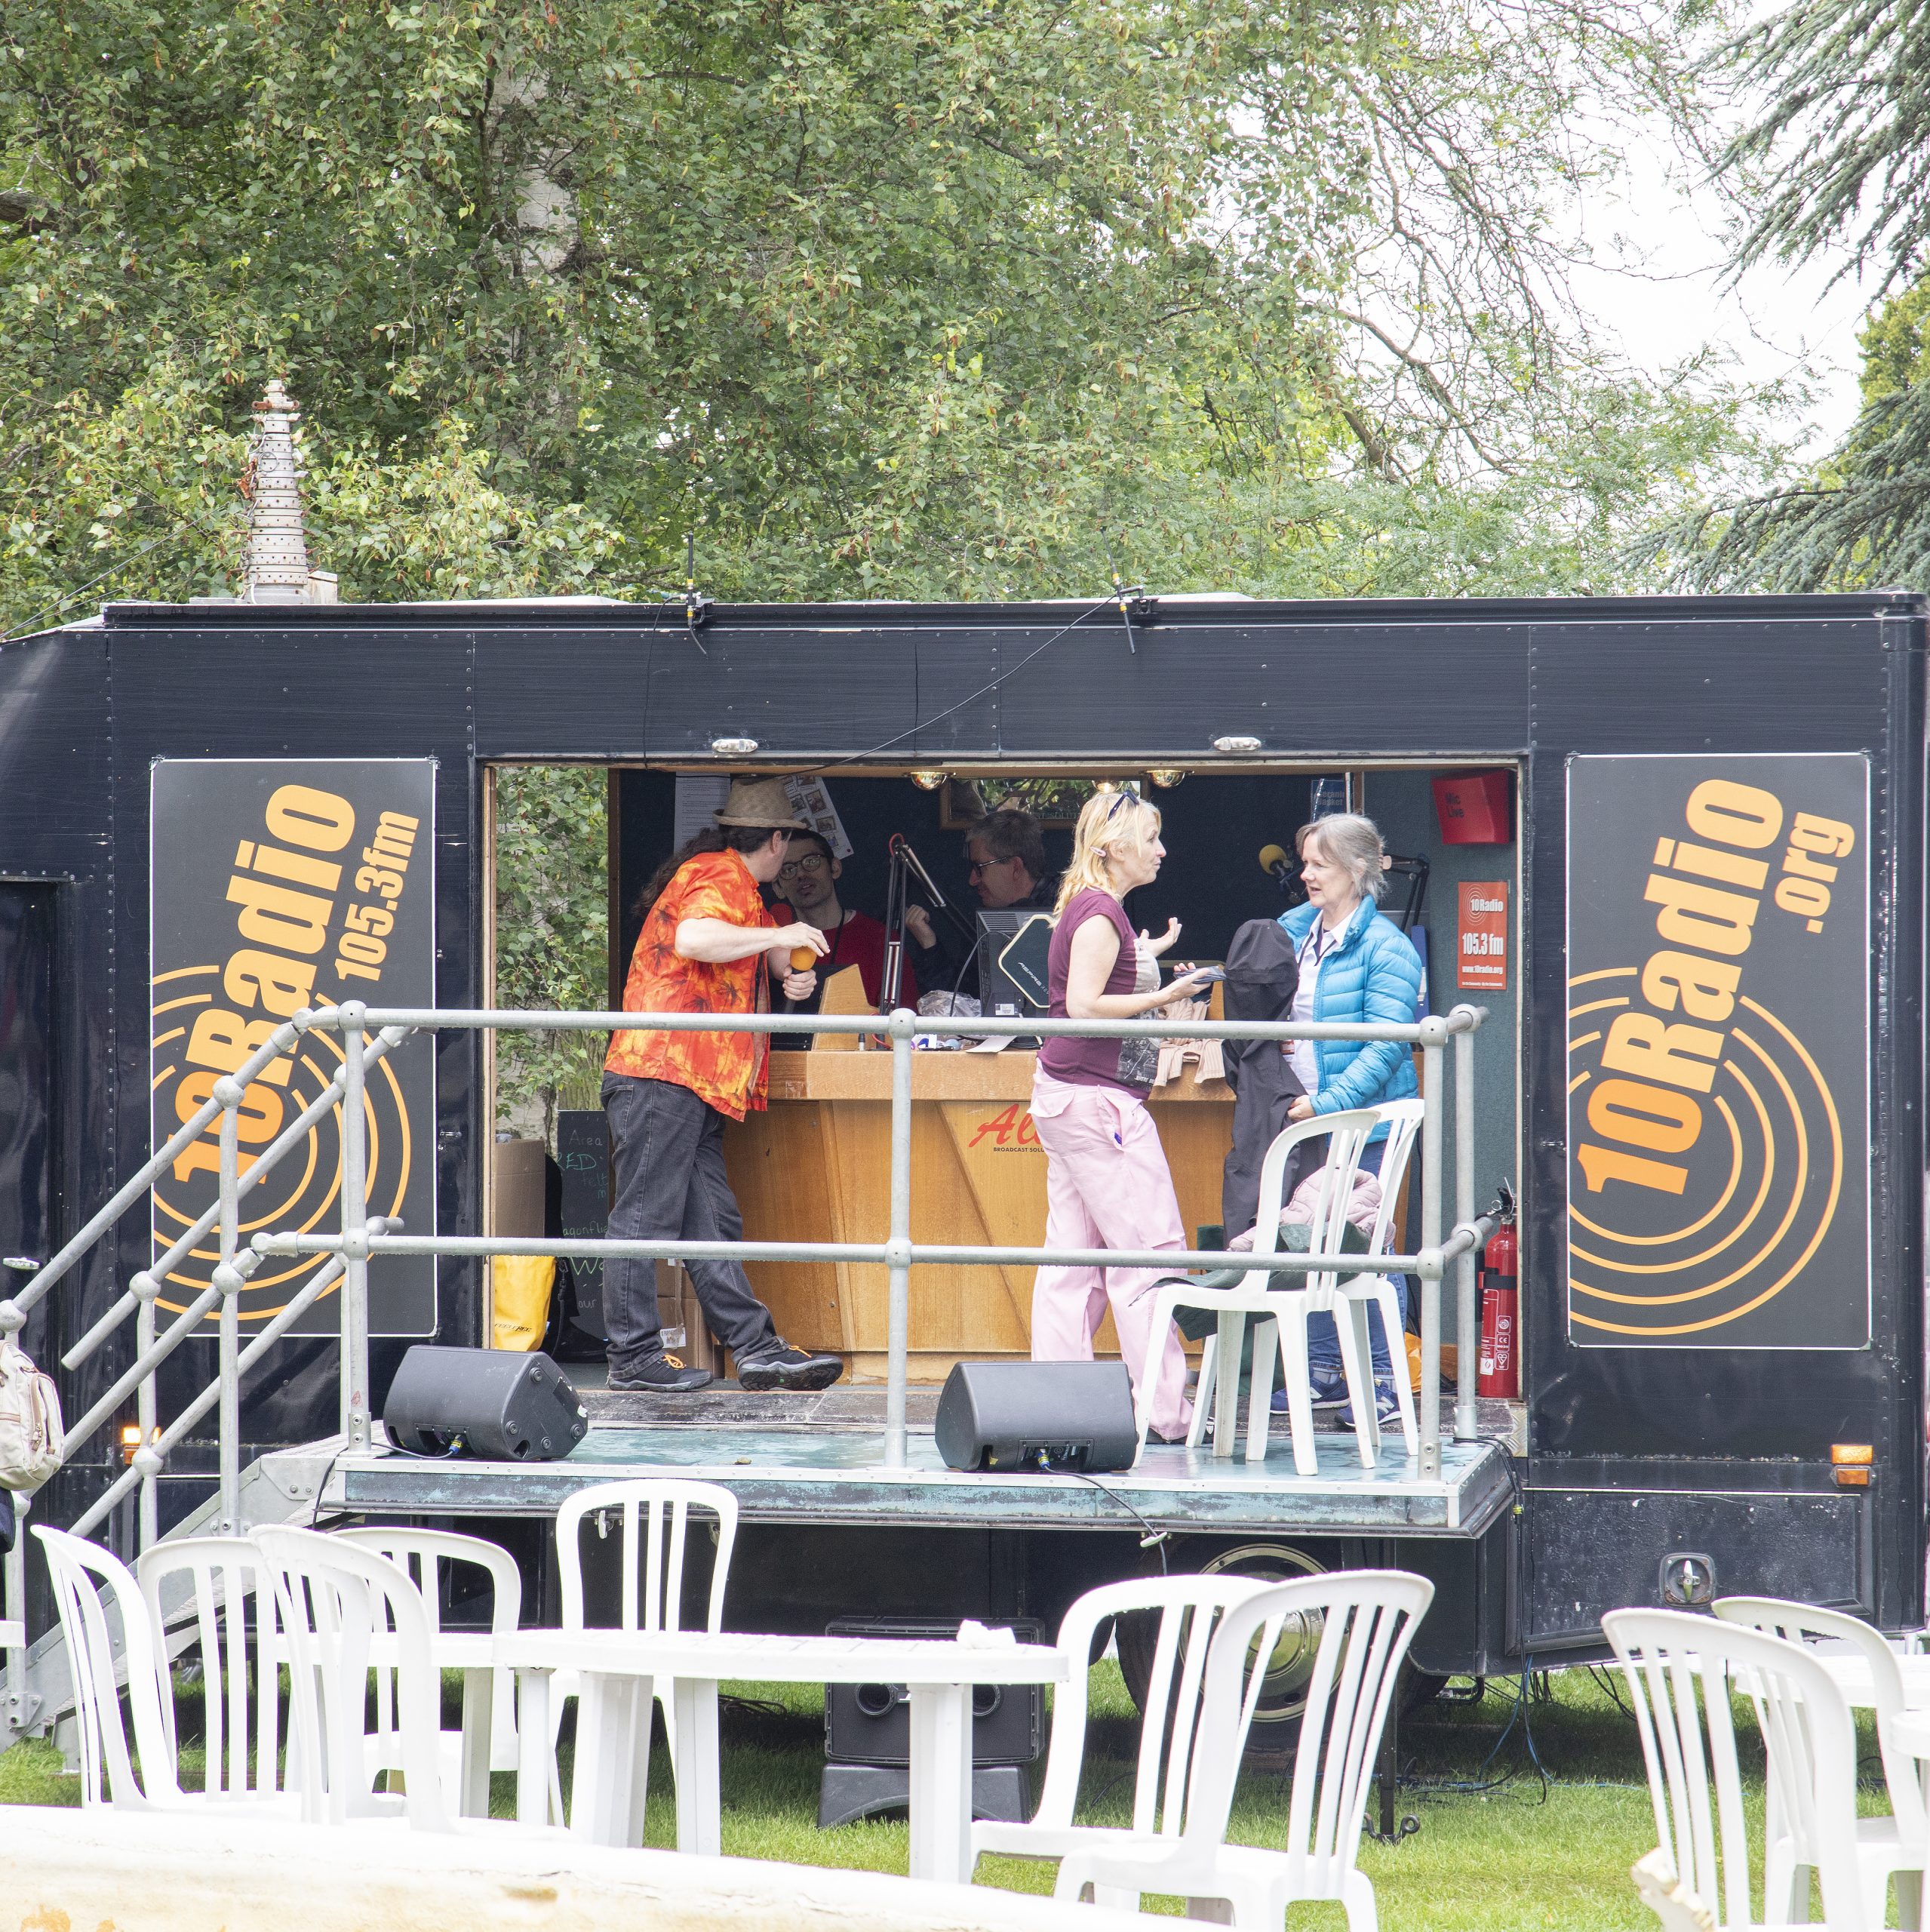 10 Radio stage in the fountain area of Vivary Park